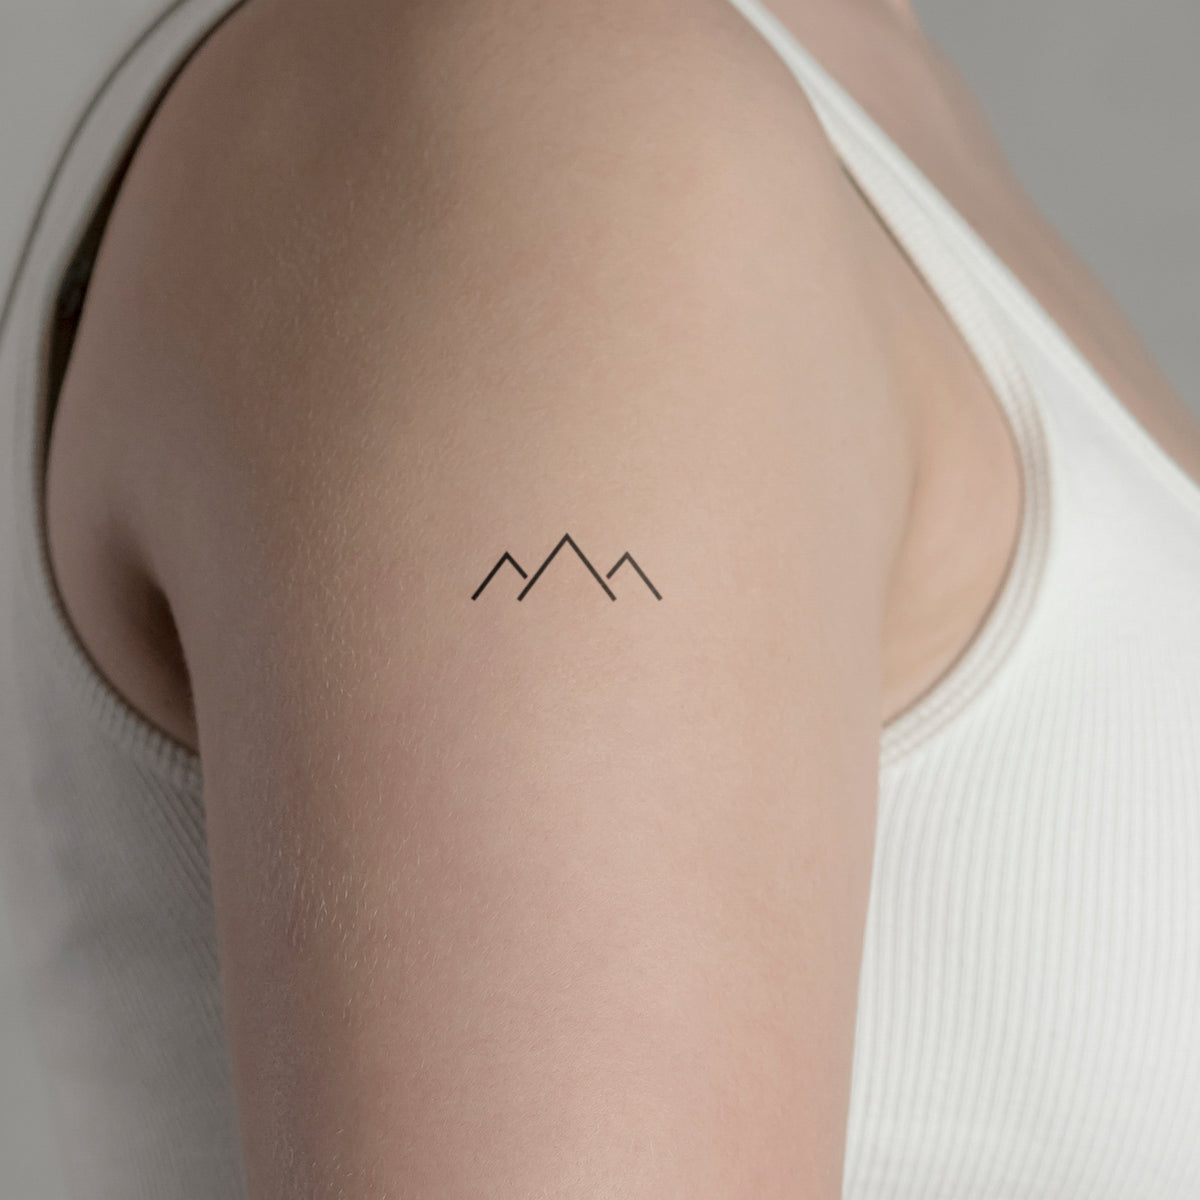 Tiny mountain tattoo on the ankle - Tattoogrid.net